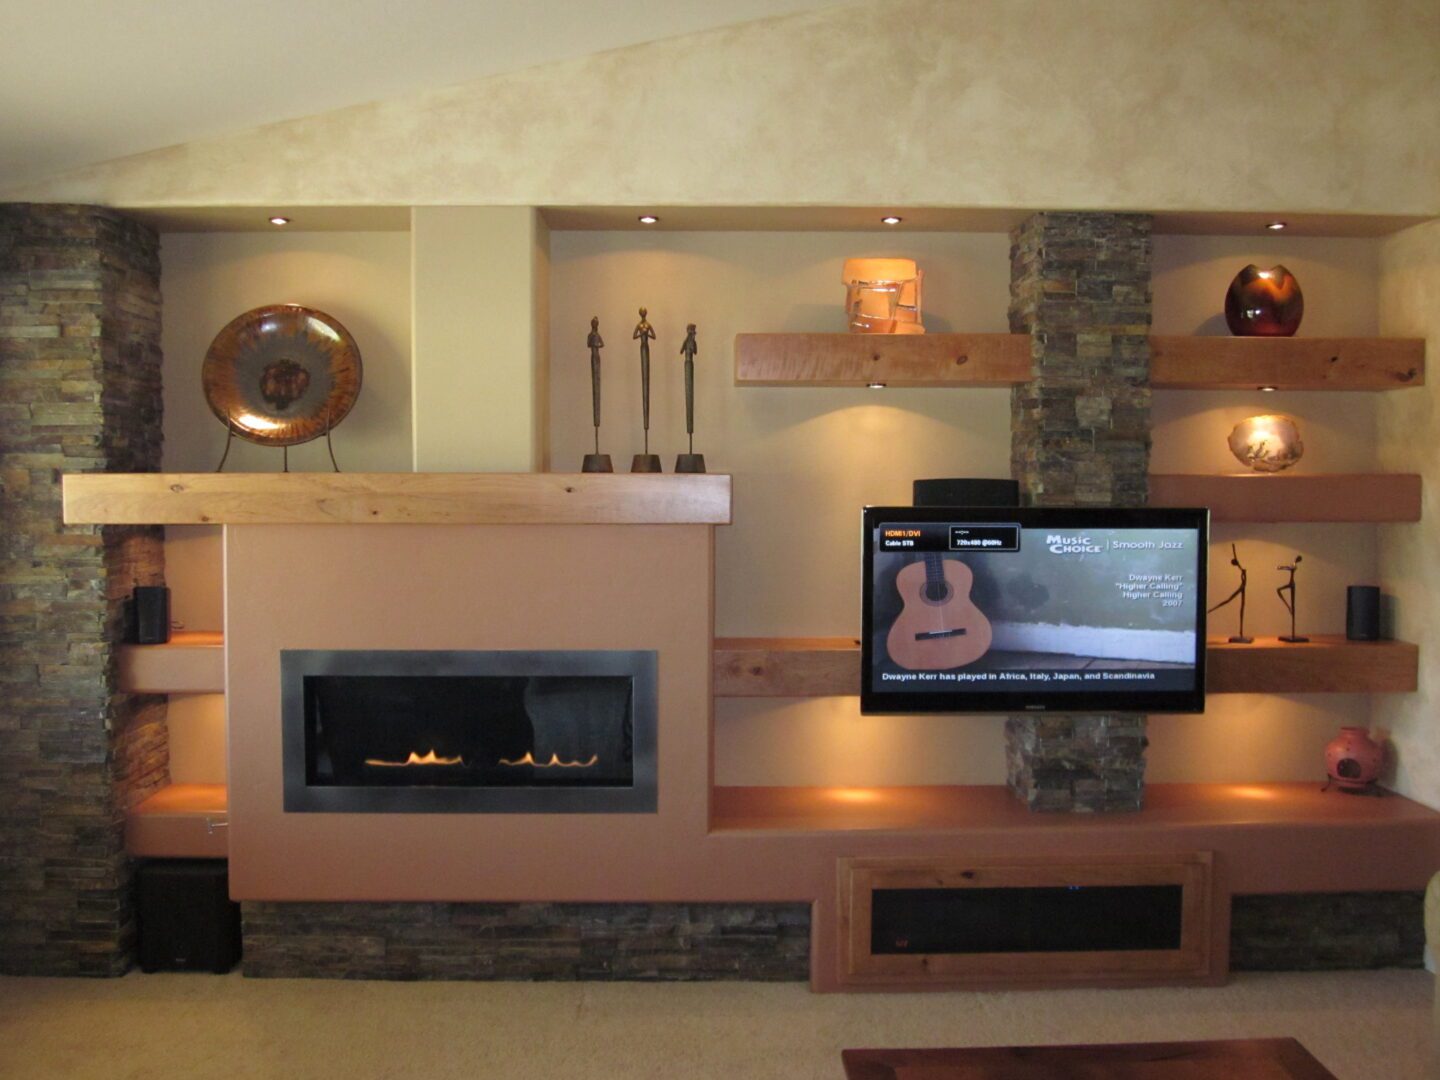 A living room with new fireplace and flatscreen television